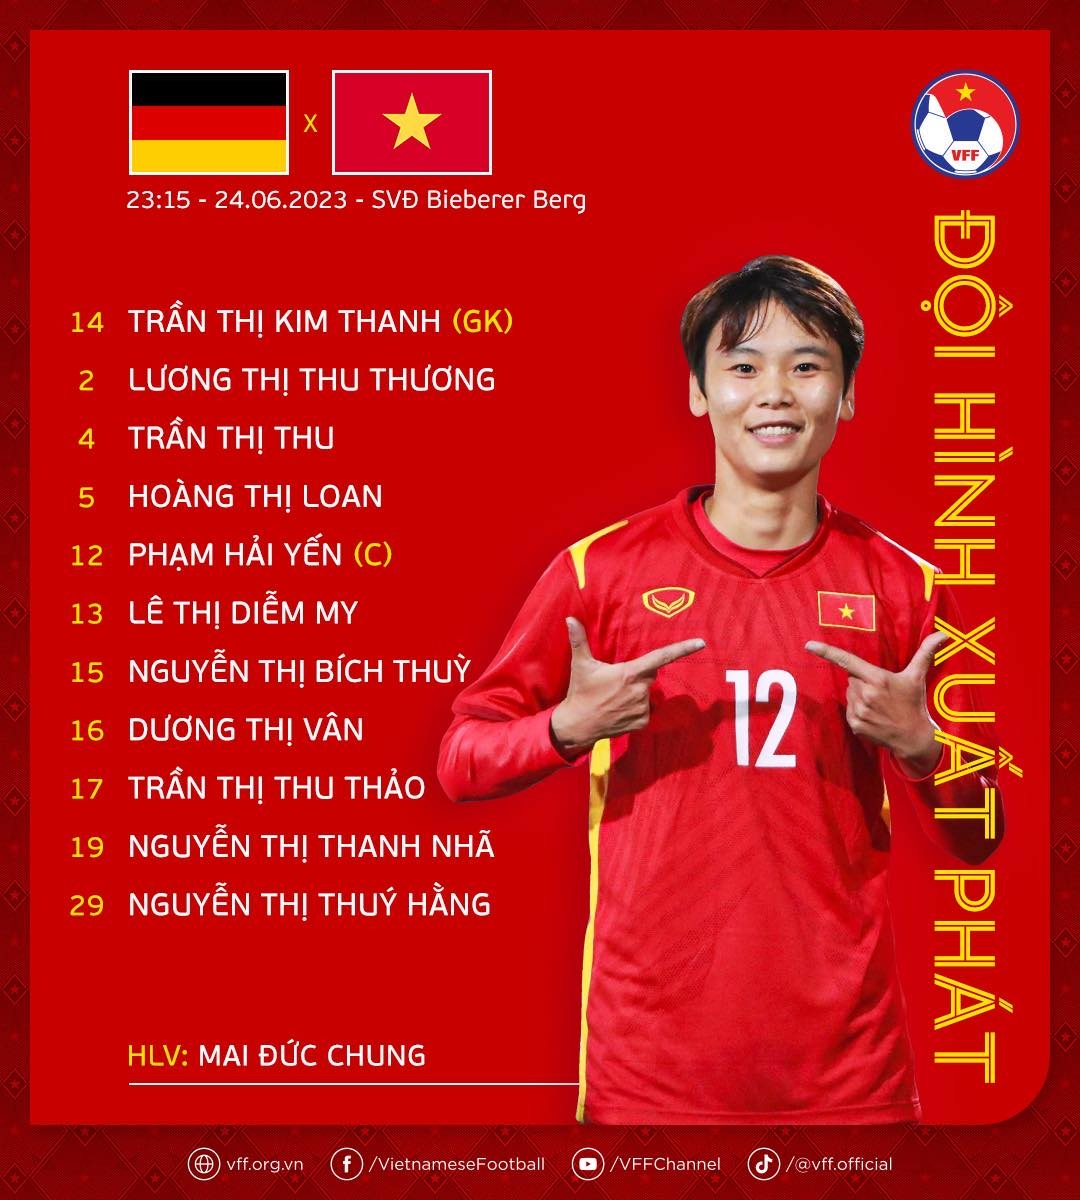 thanh nha ghi ban thang lich su, Dt nu viet nam thua 1-2 truoc Dt nu Duc hinh anh 3